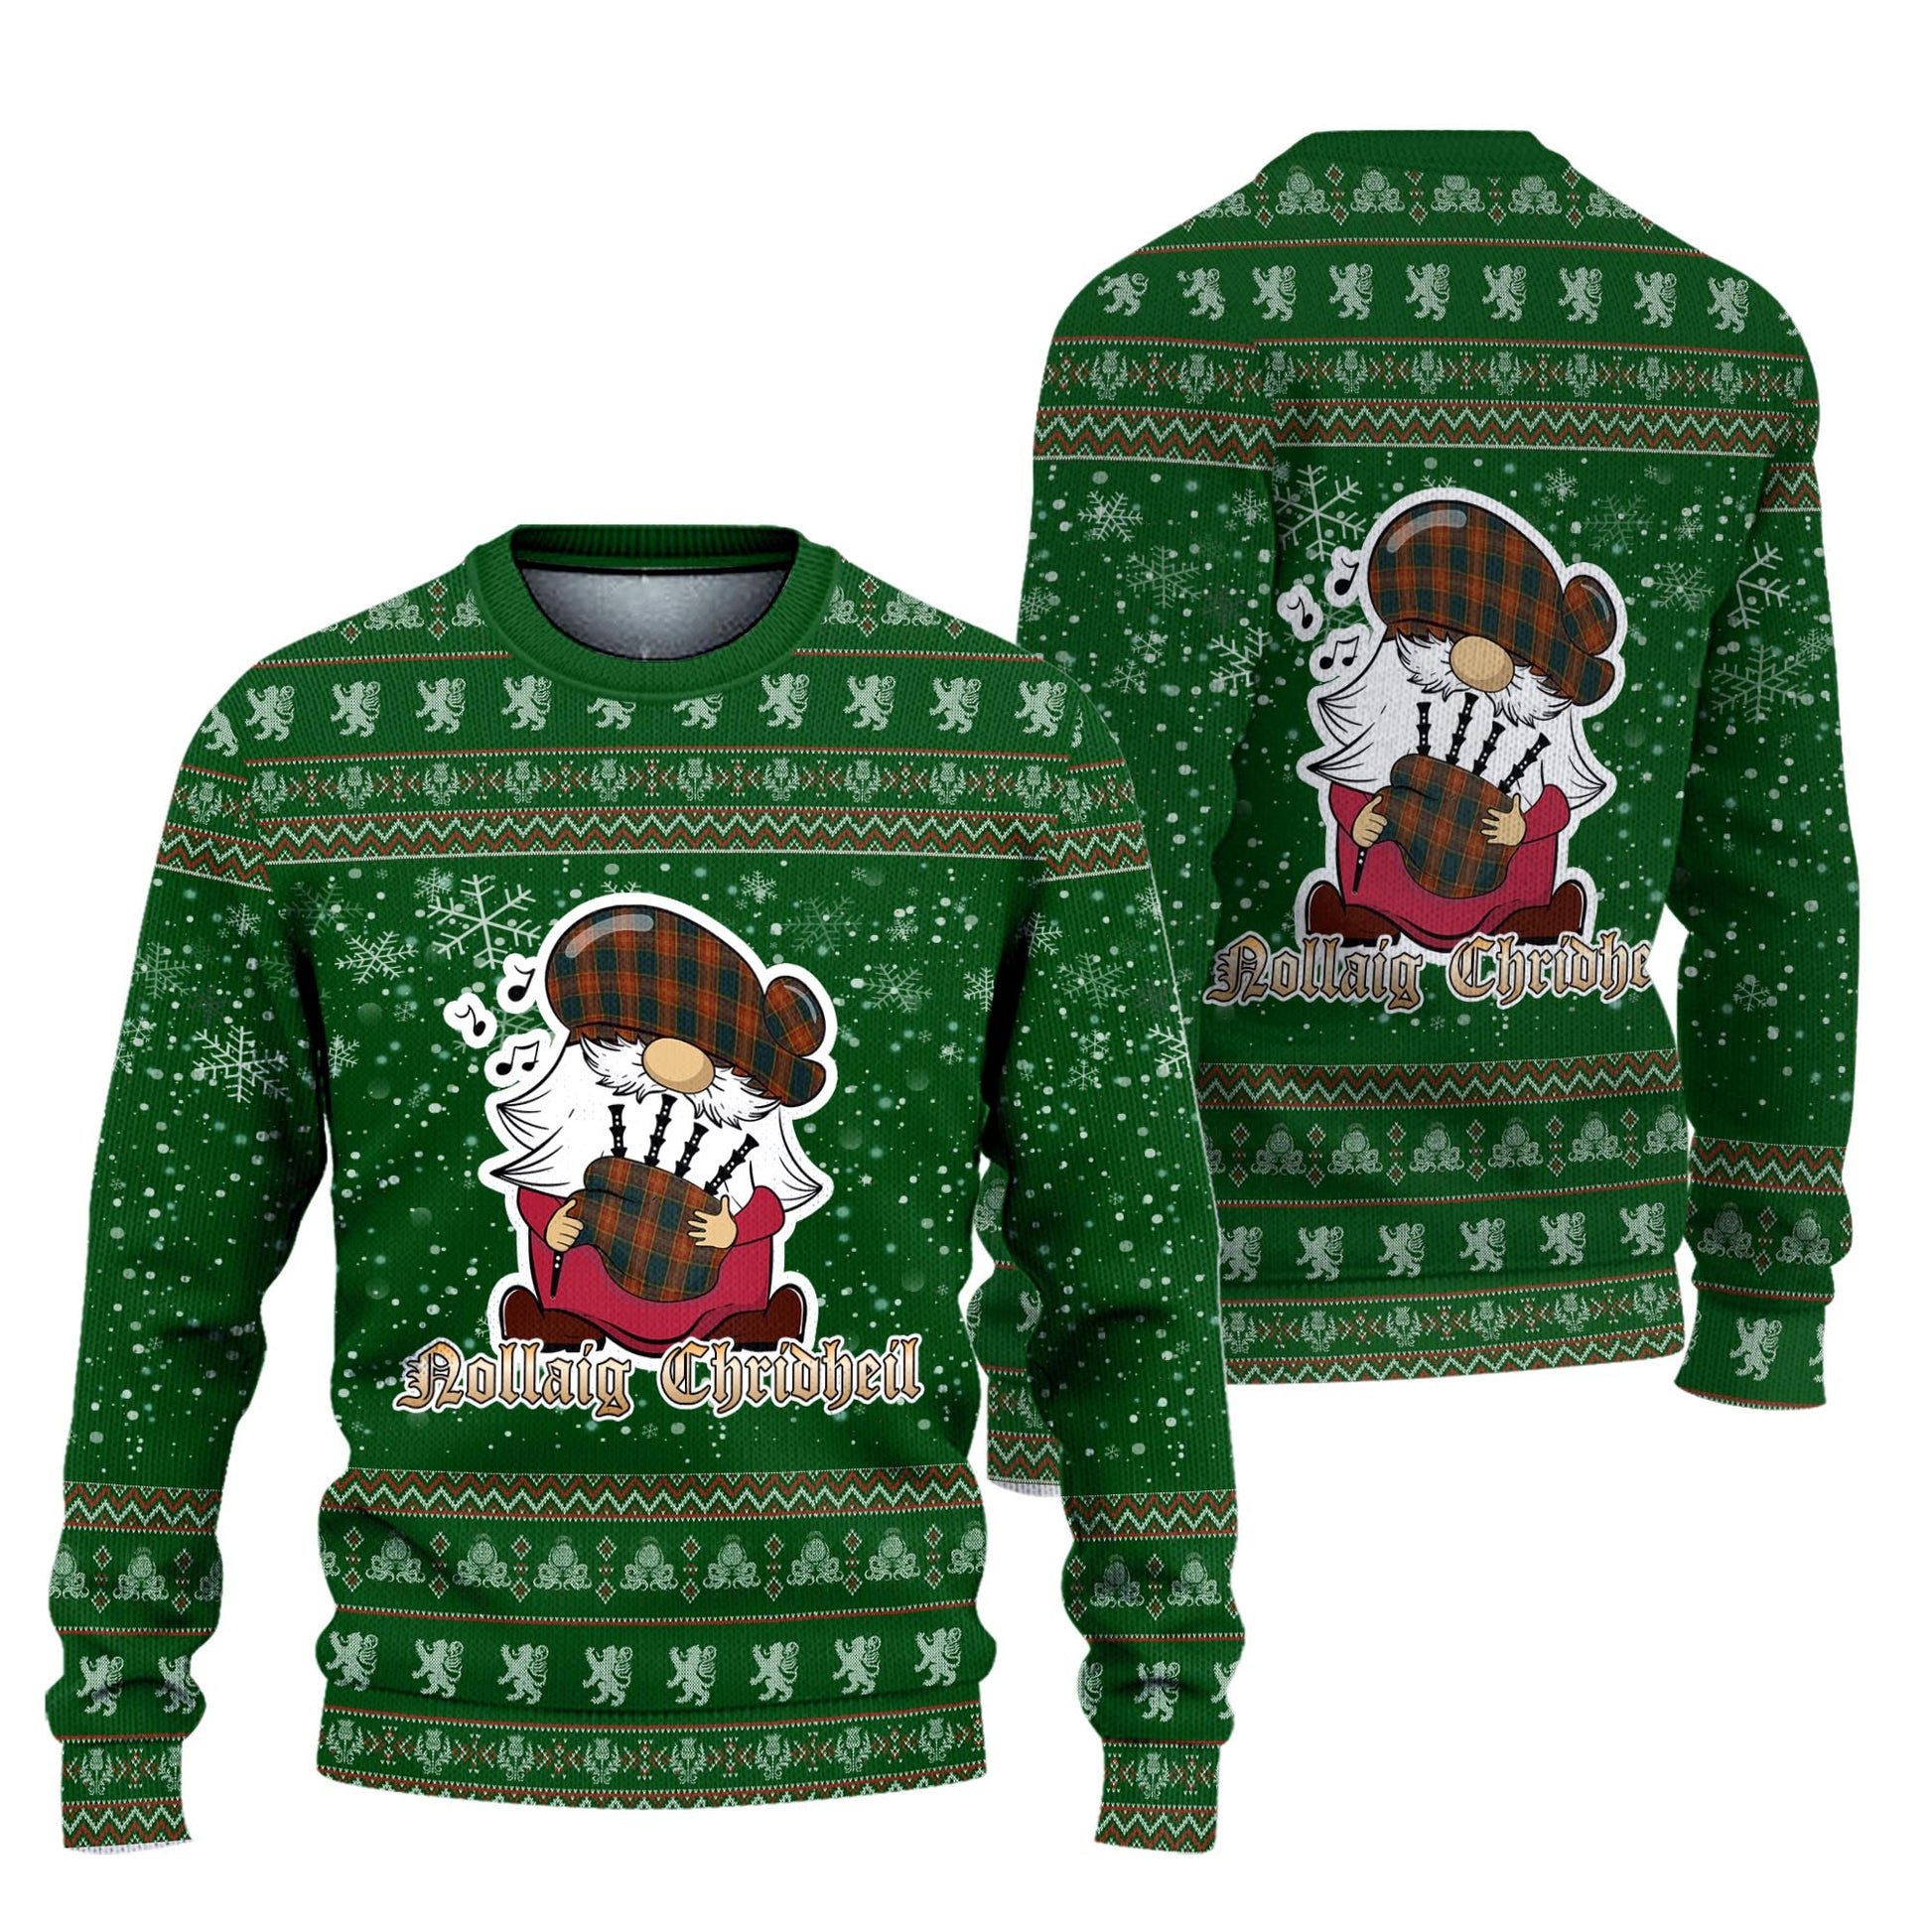 Roscommon County Ireland Clan Christmas Family Knitted Sweater with Funny Gnome Playing Bagpipes Unisex Green - Tartanvibesclothing